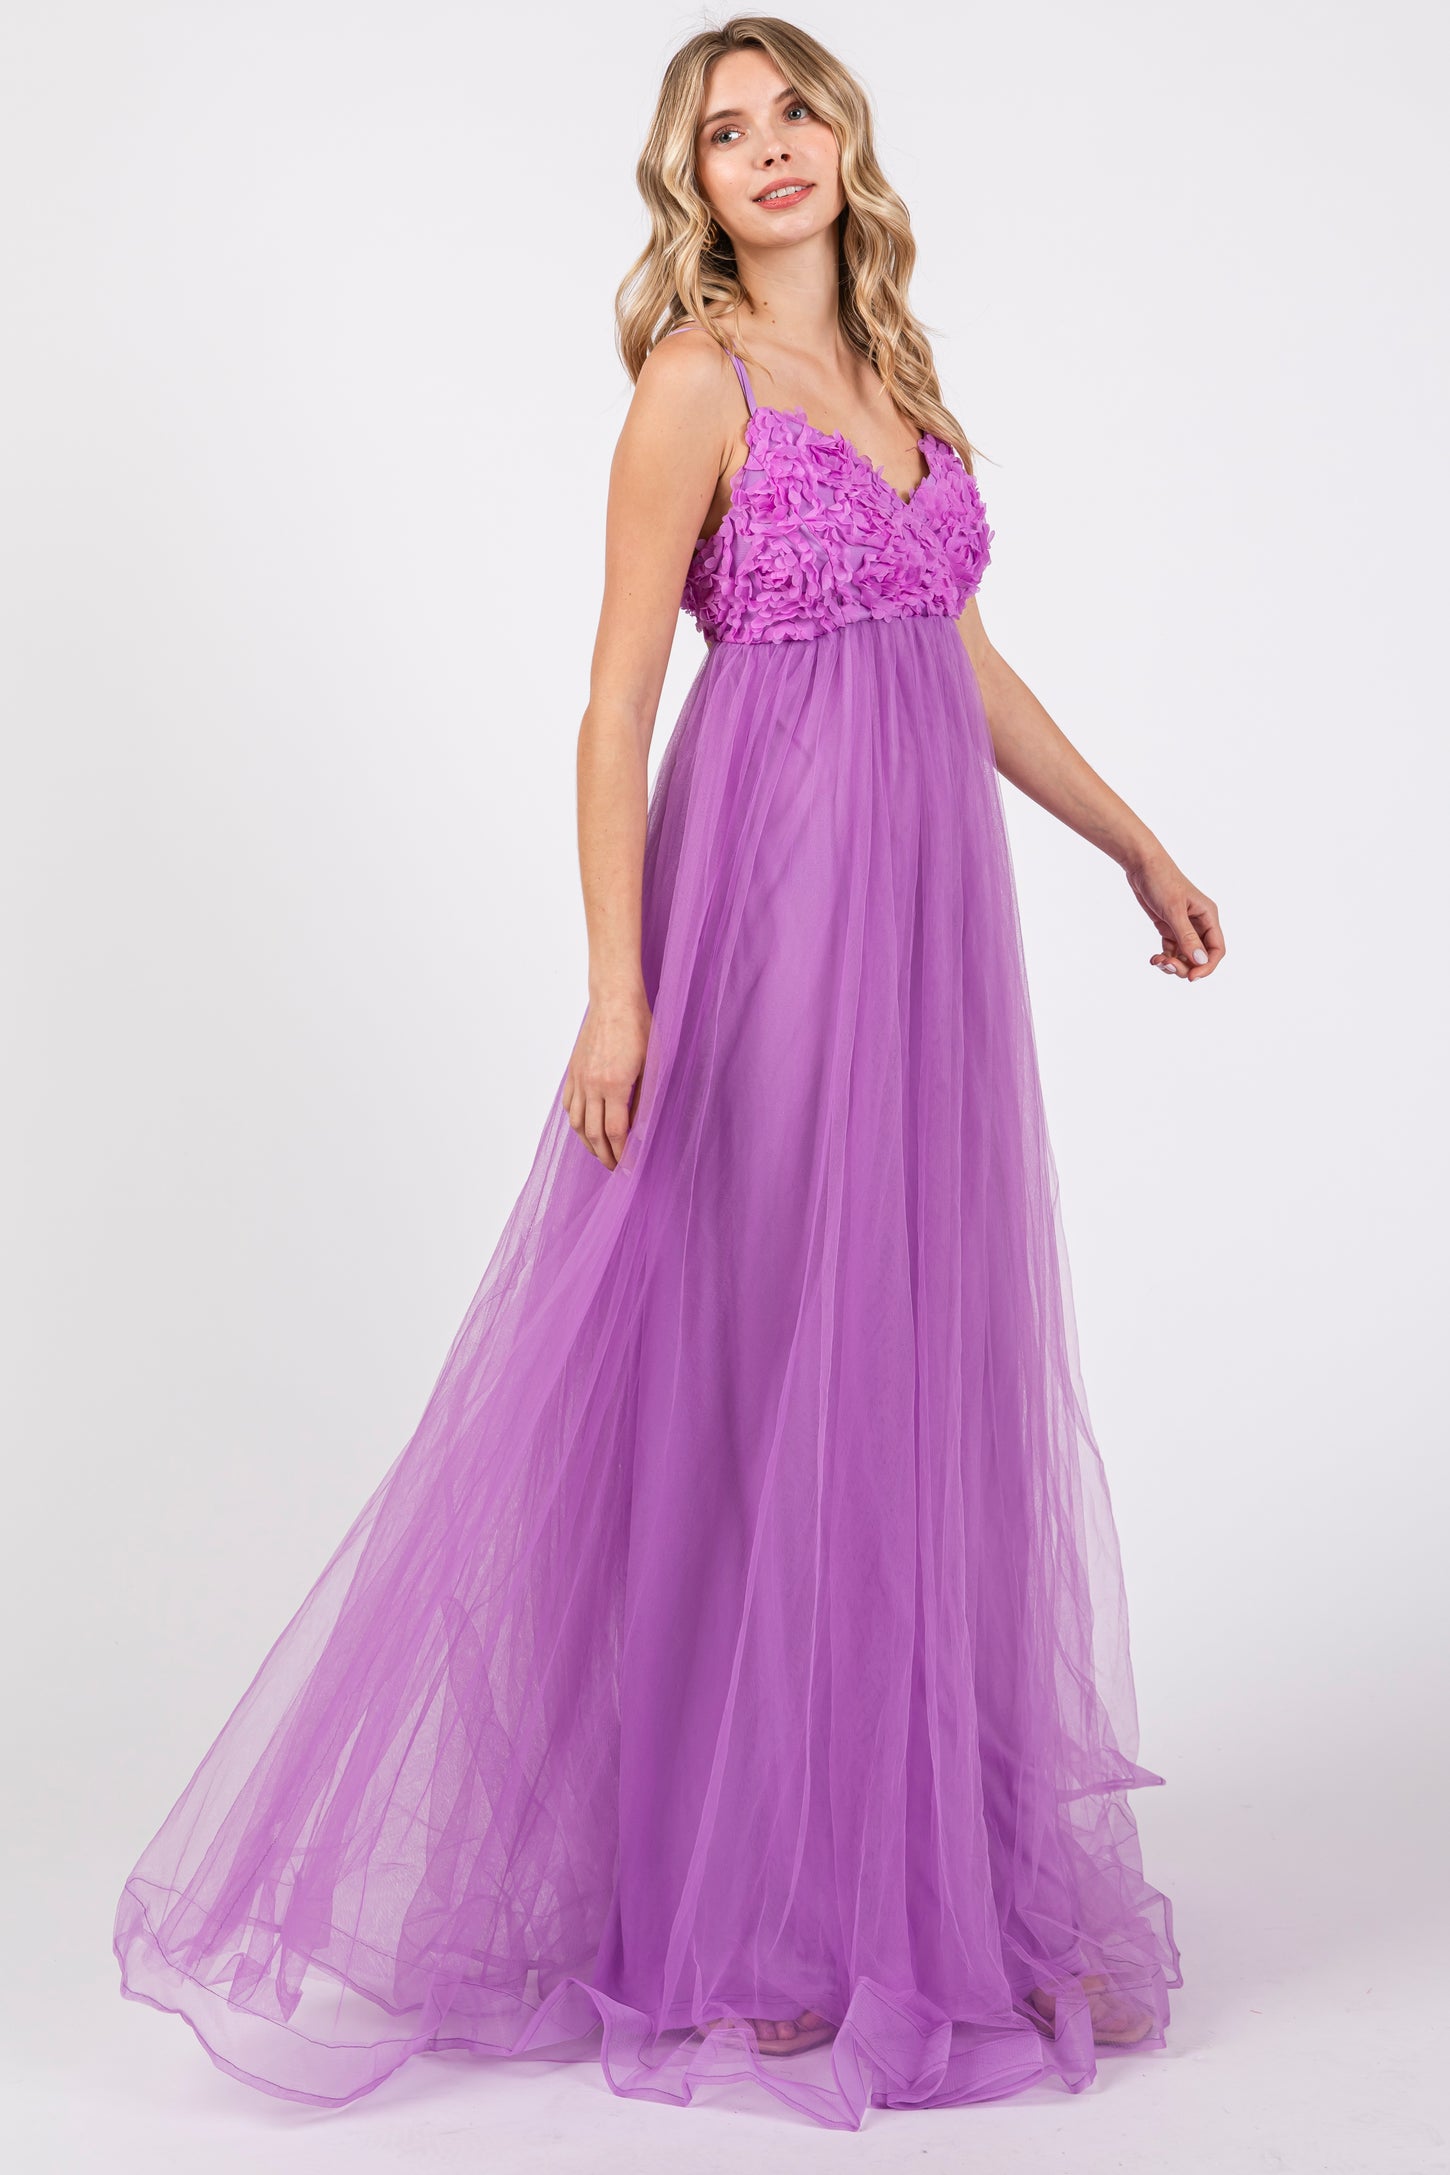 Purple Floral Applique Lace-Up Back Tulle Maternity Maxi Dress– PinkBlush